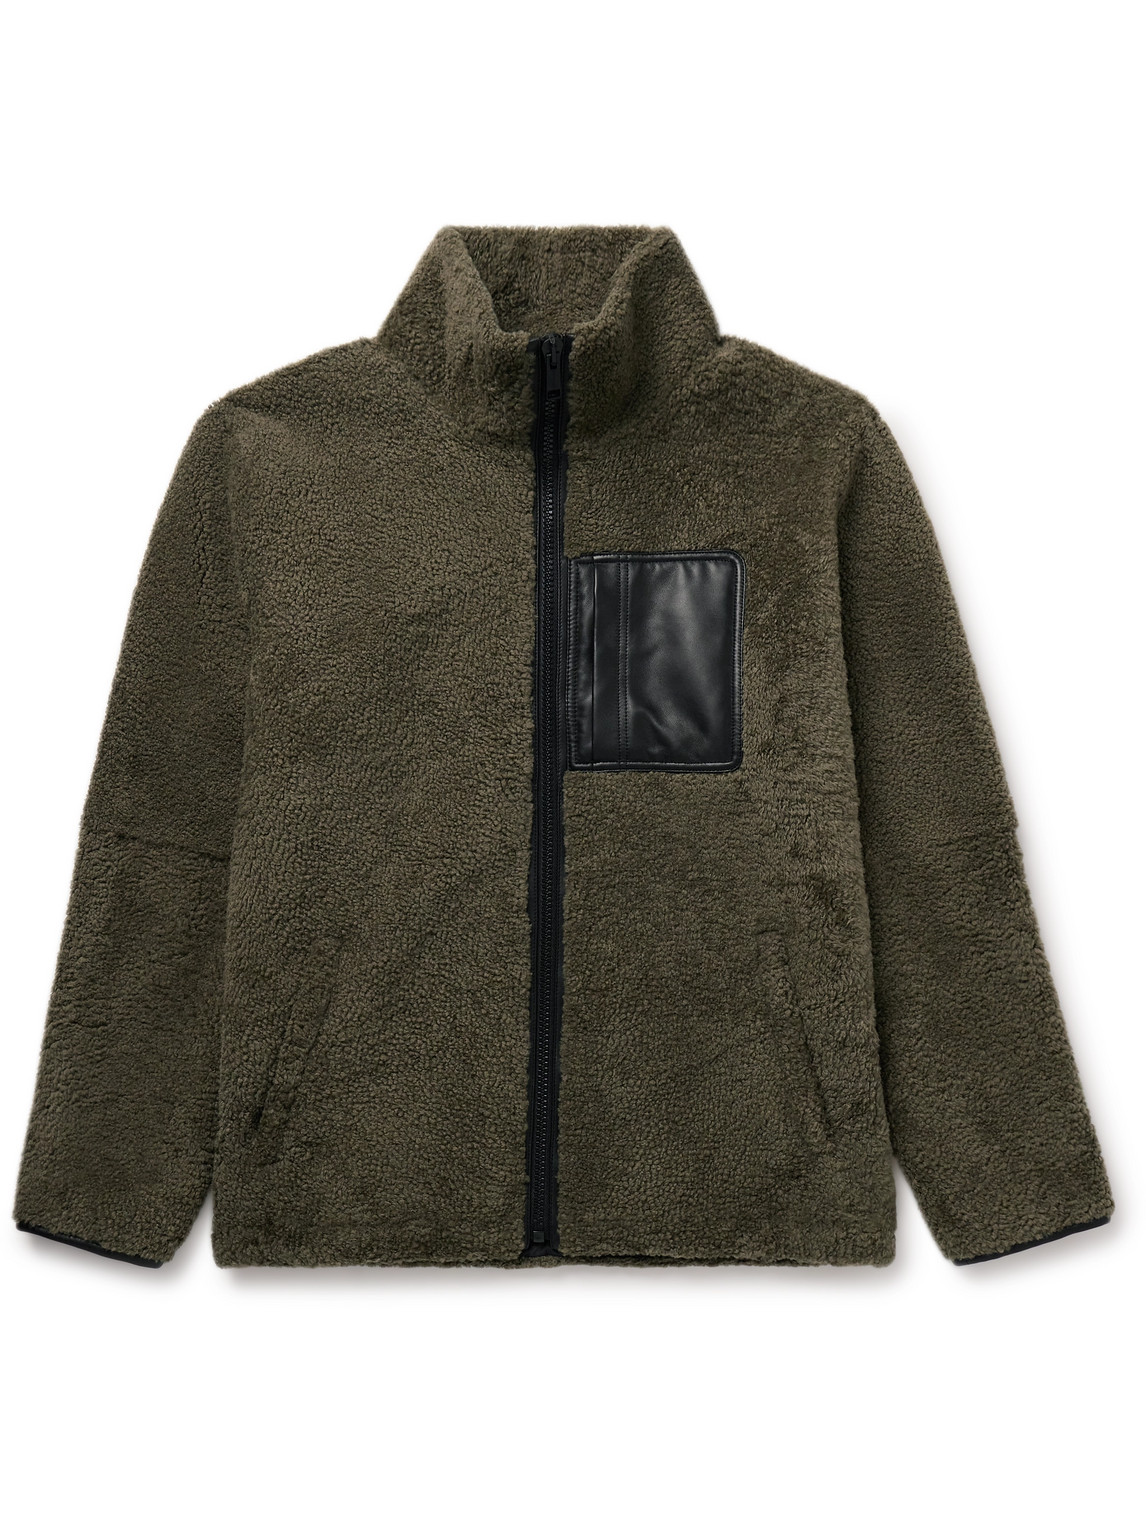 Yves Salomon - Reversible Leather-Trimmed Shearling and Shell Jacket - Men - Green - IT 48 von Yves Salomon